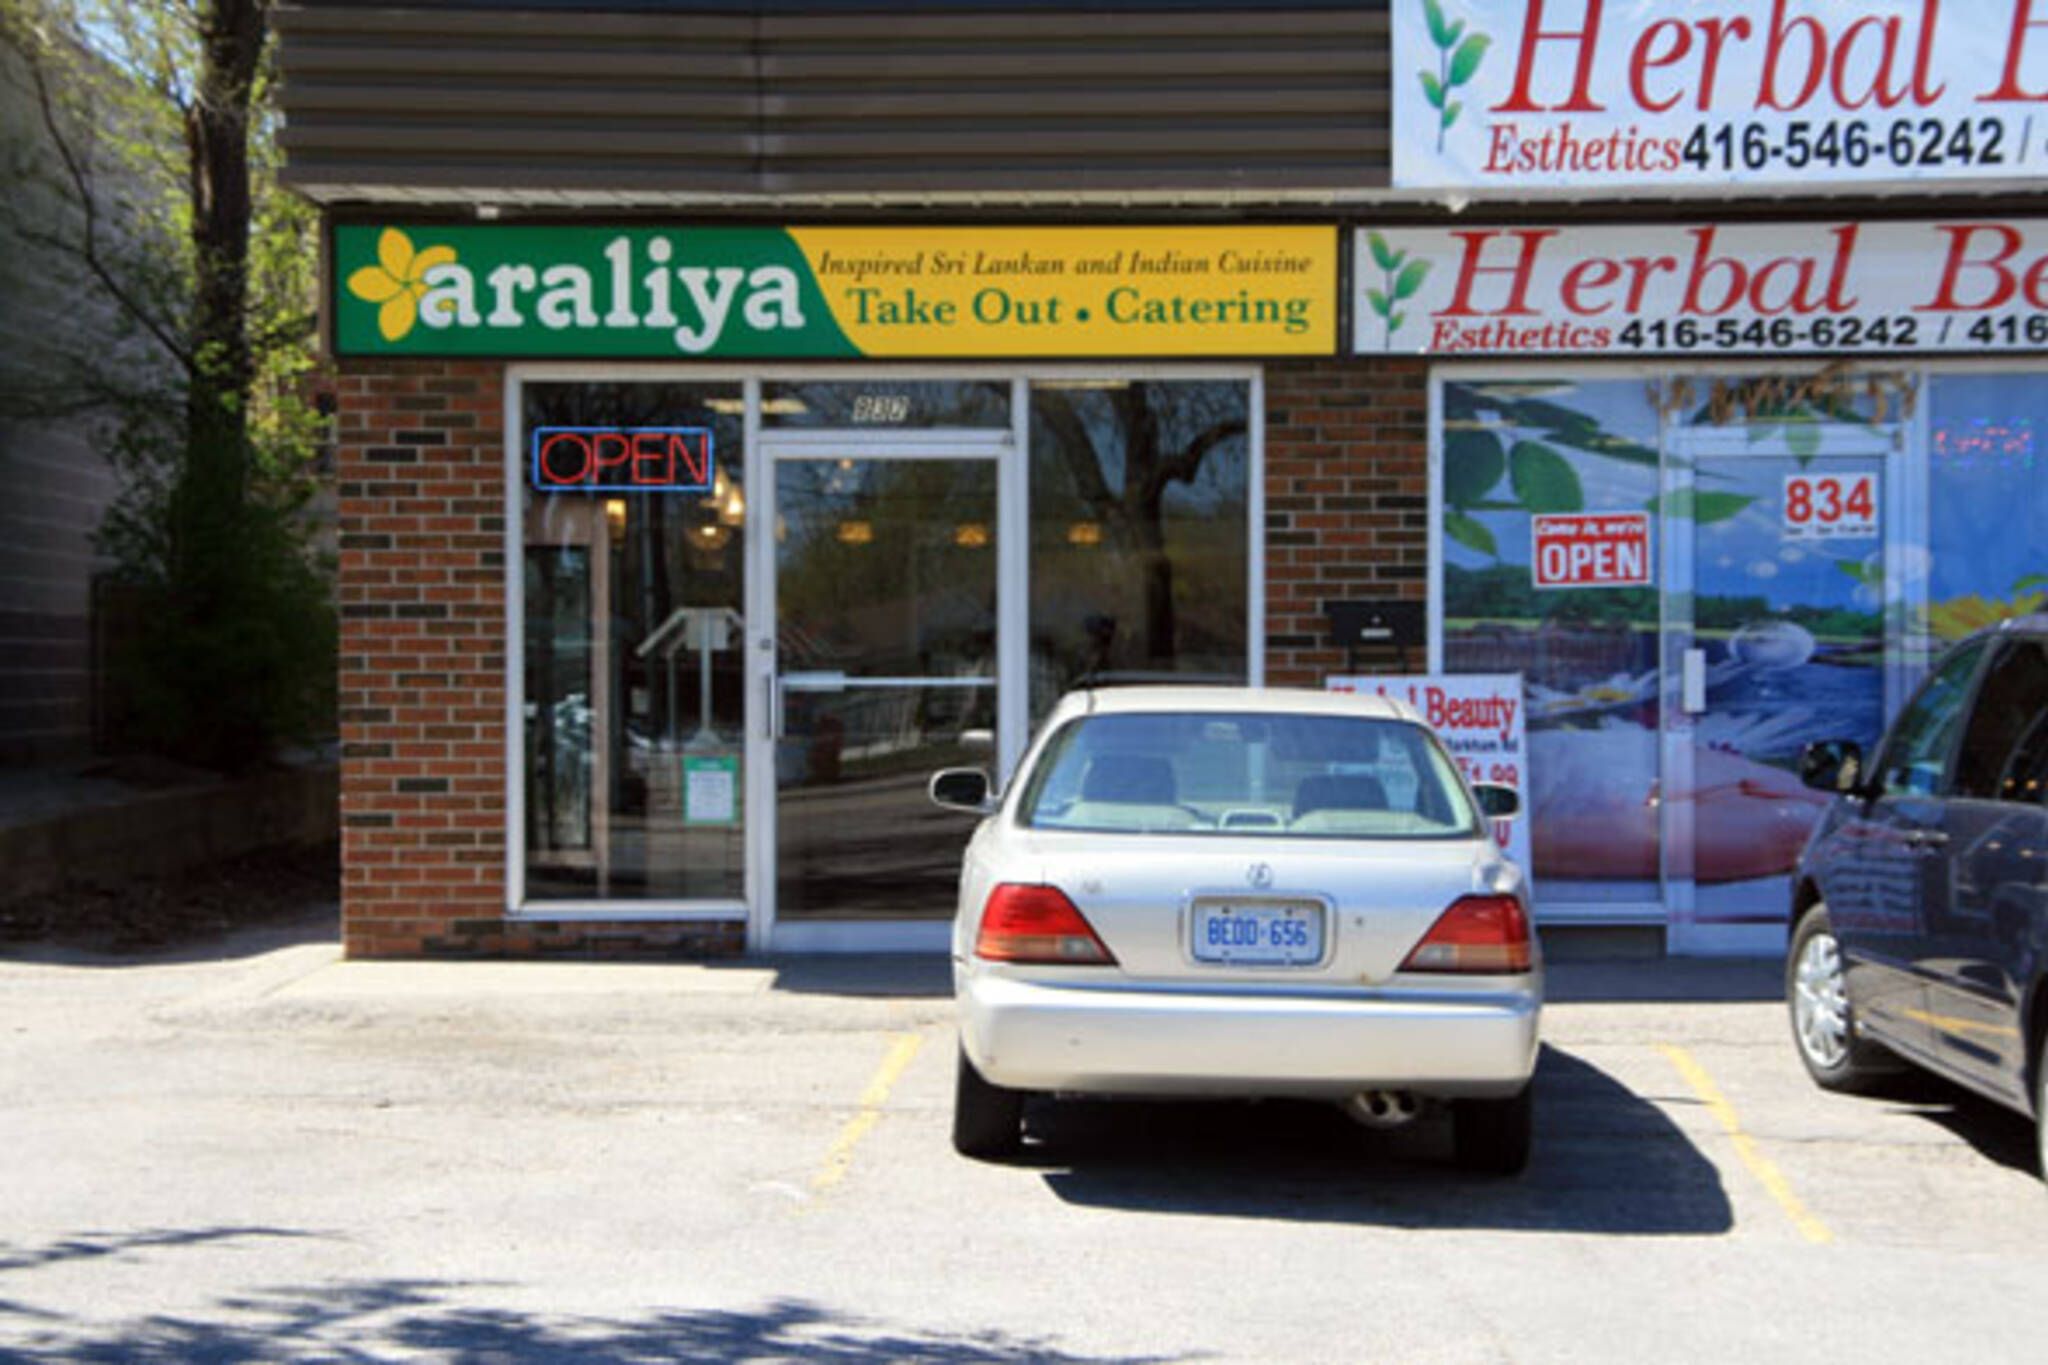 Araliya Takeout and Catering